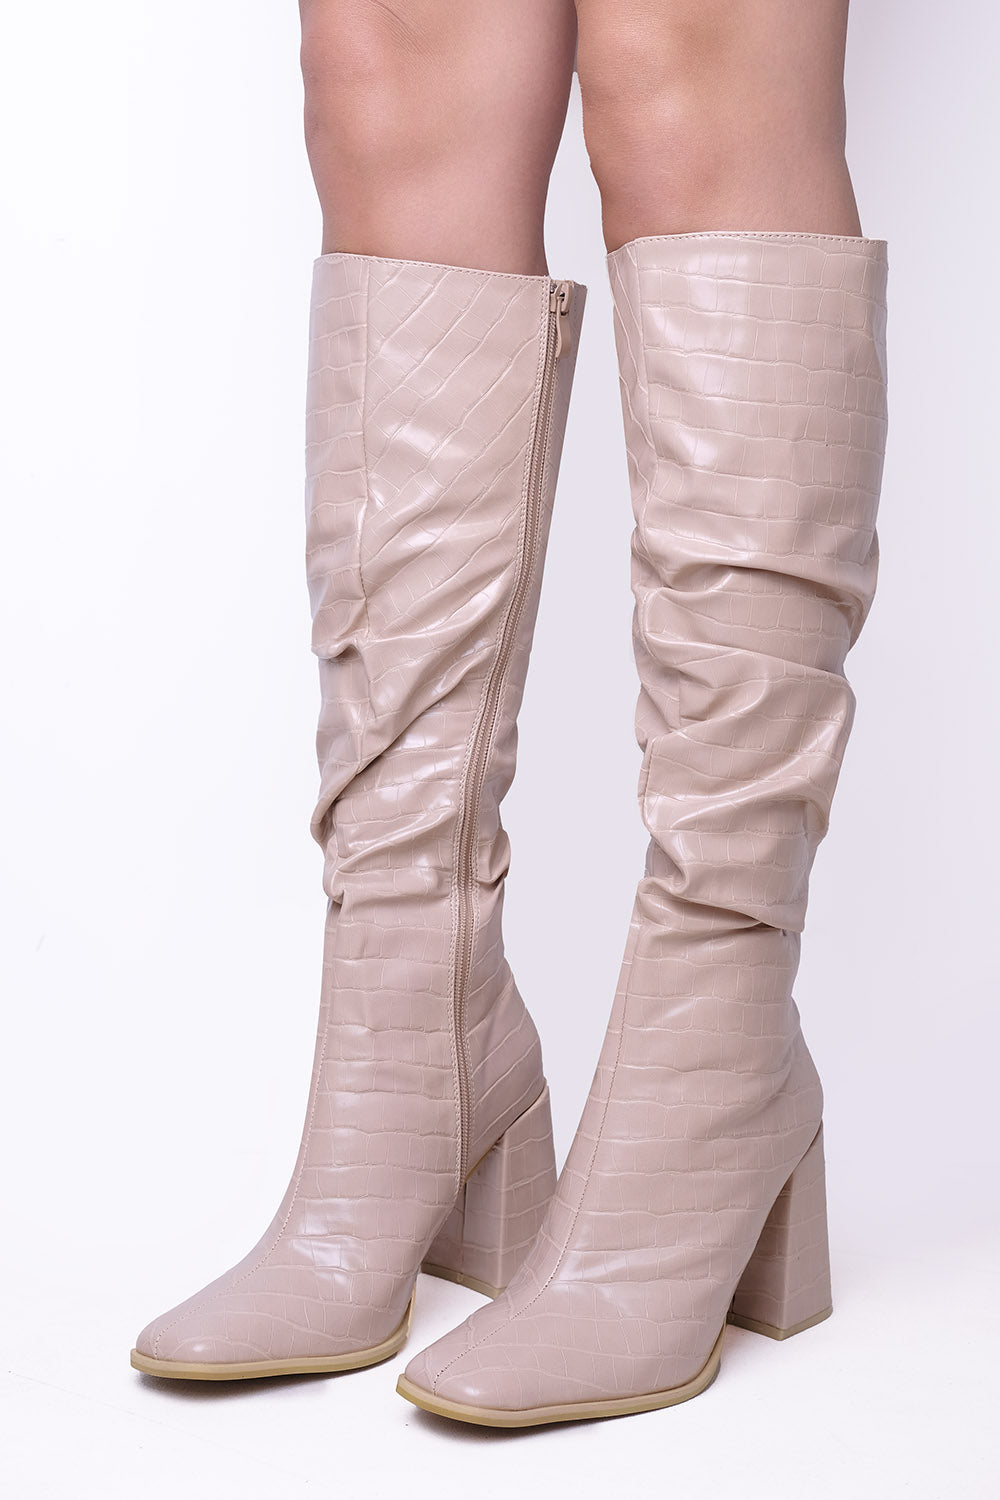 Nude Croc PU Ruched Calf High Boots With Side Zip